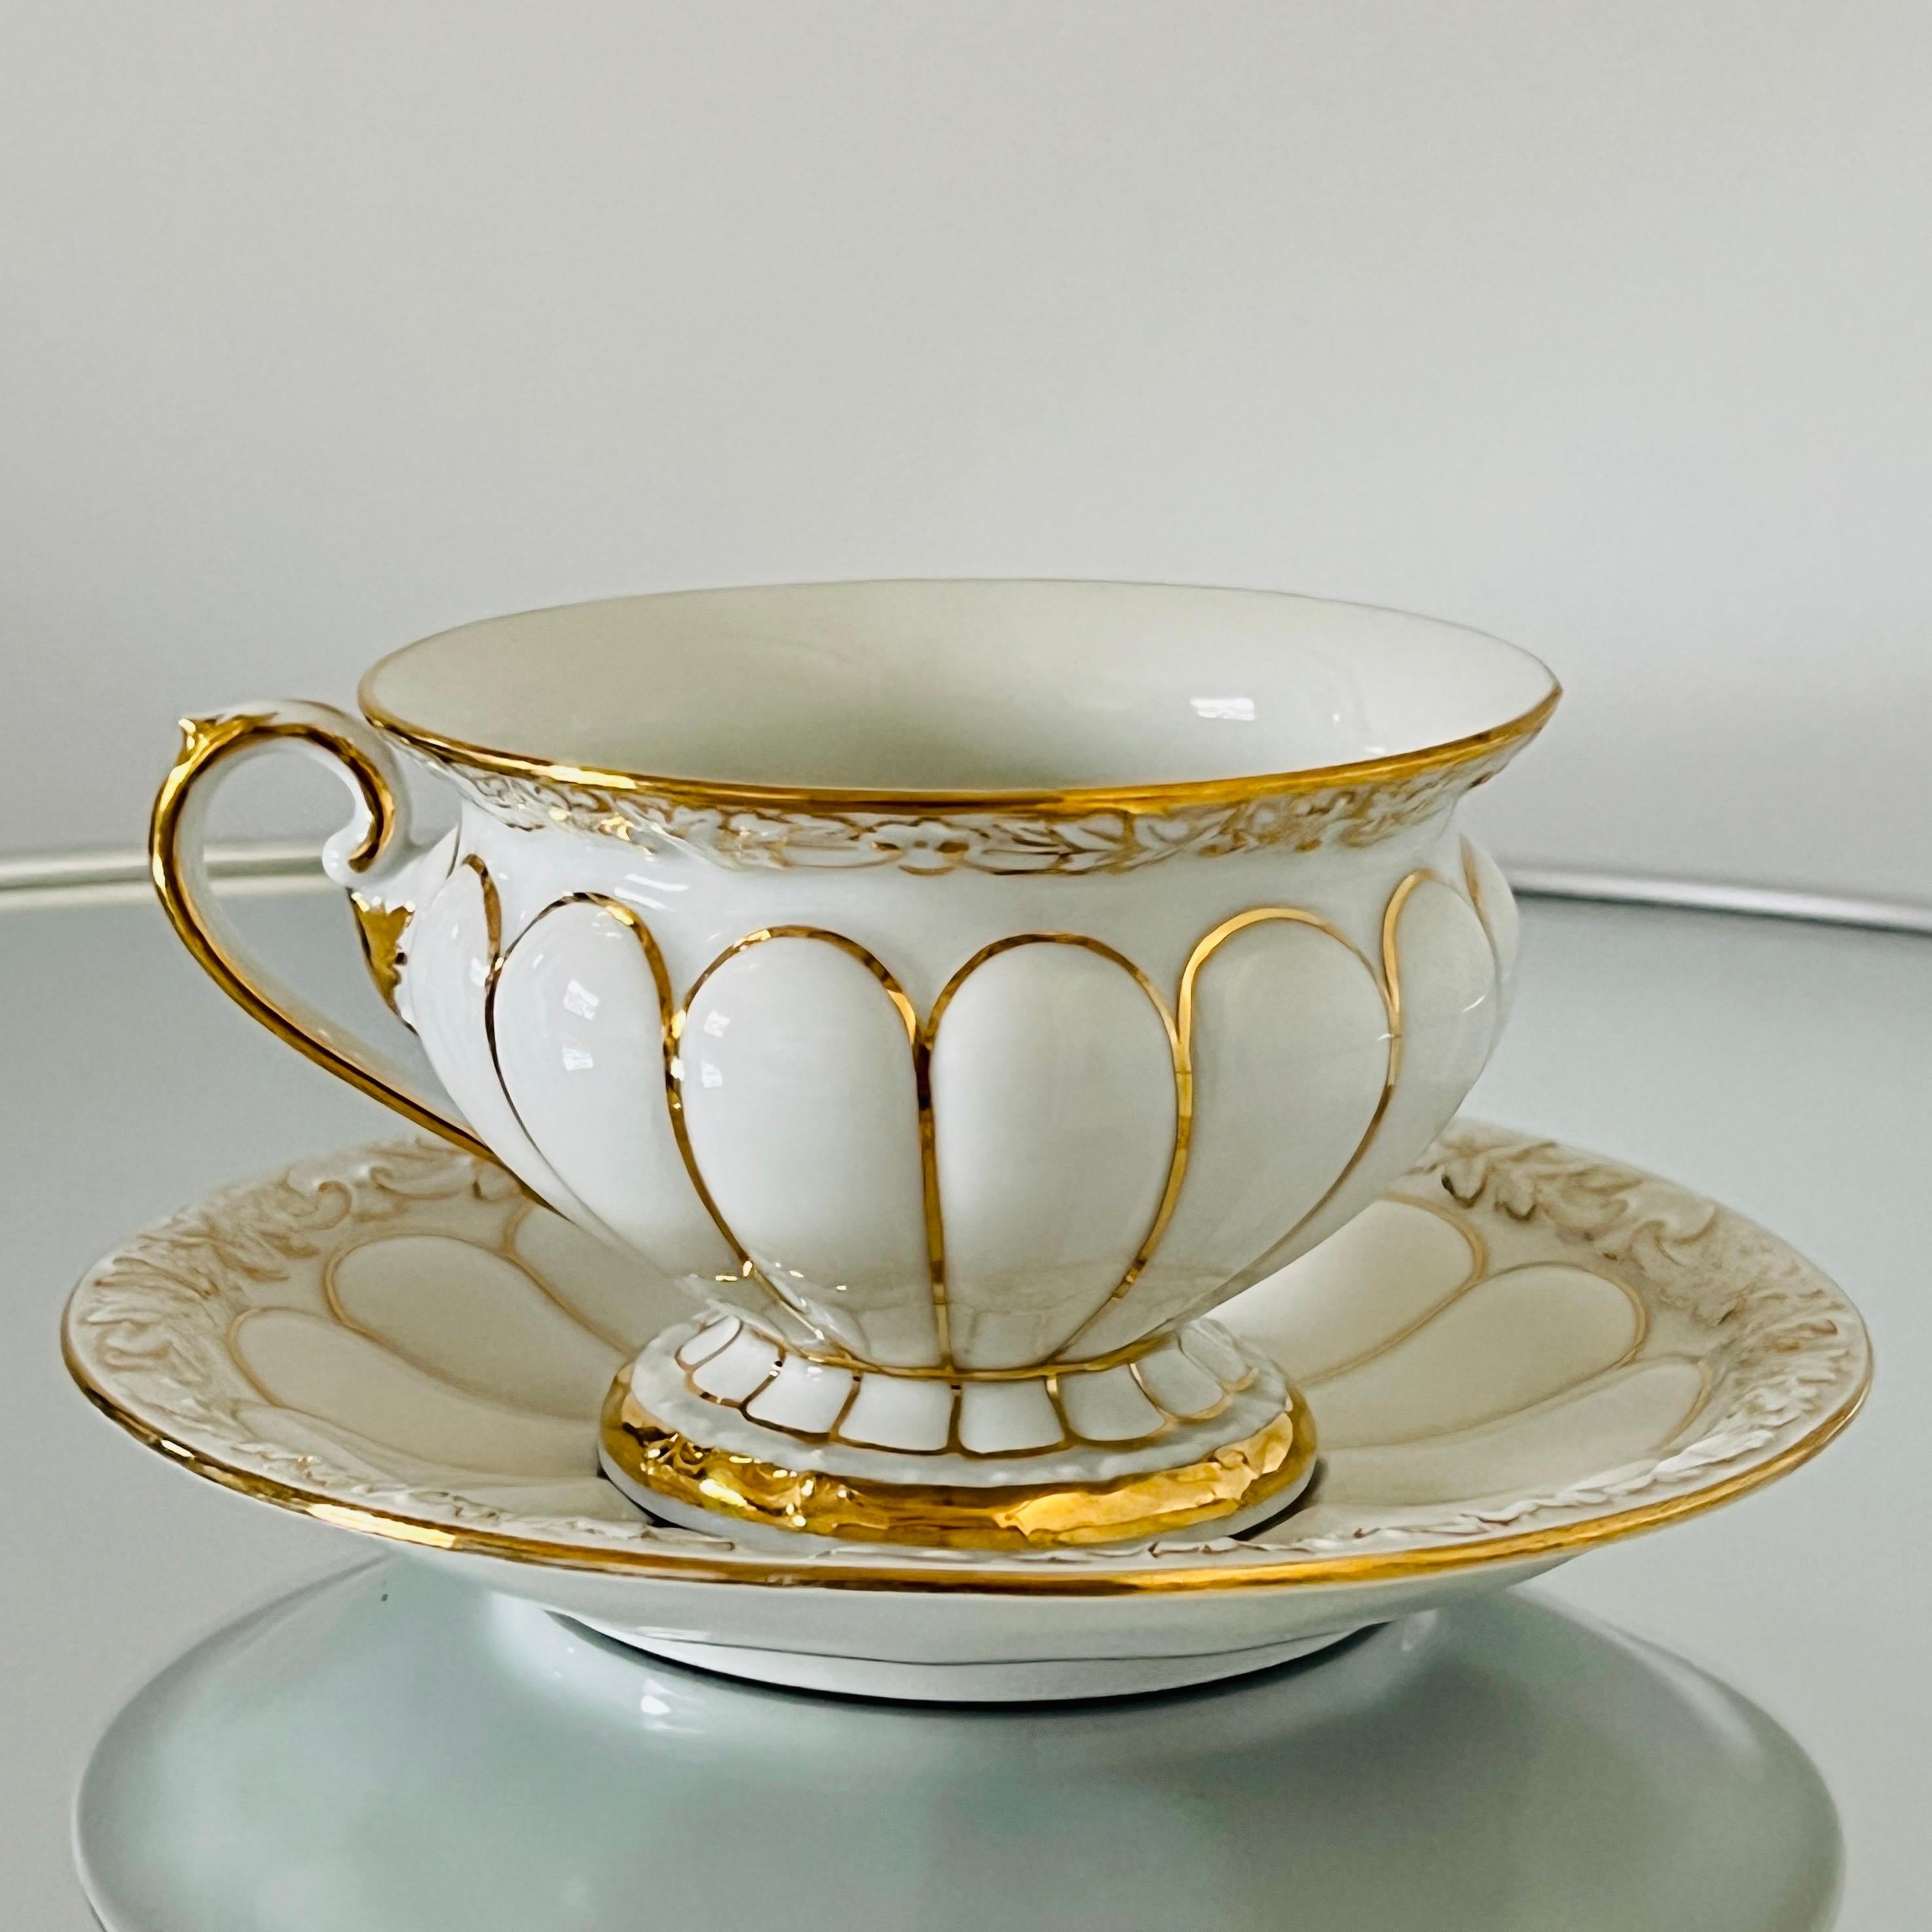 Set of 13 Meissen porcelain cups and saucers from the opulent Golden Baroque series handmade in Germany. The cups and saucers have a white glaze finish with ornamental relief designs featuring grape leaf and floral petal motifs with hand-painted